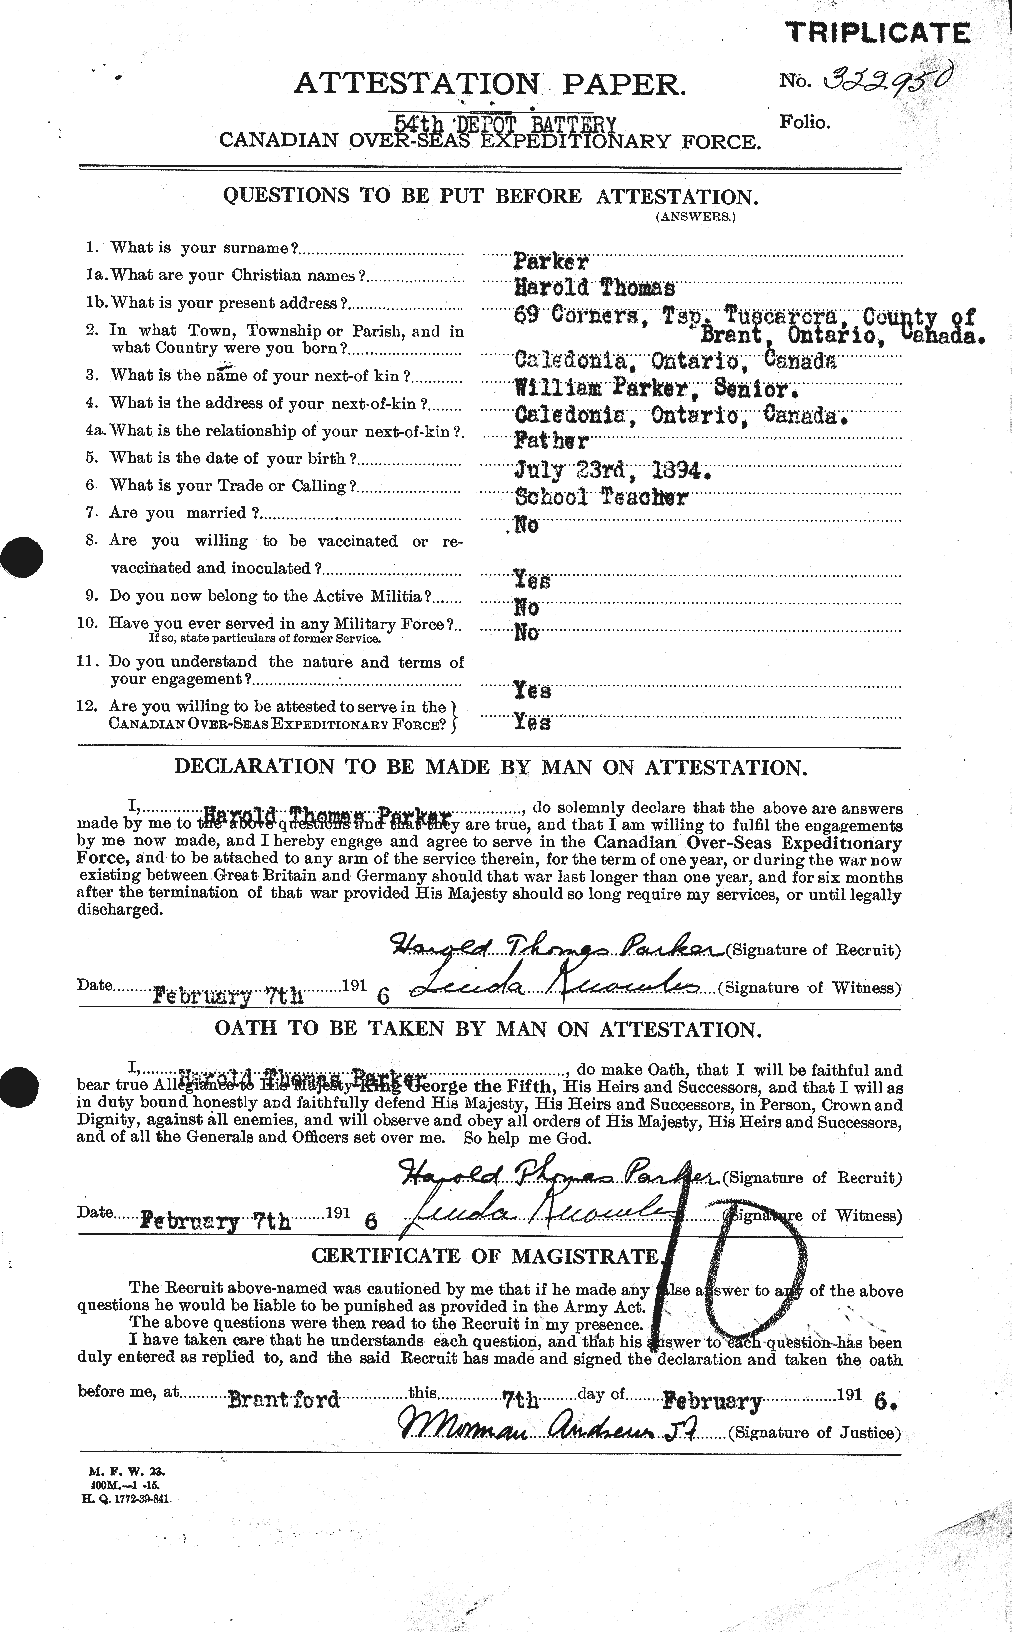 Personnel Records of the First World War - CEF 565312a